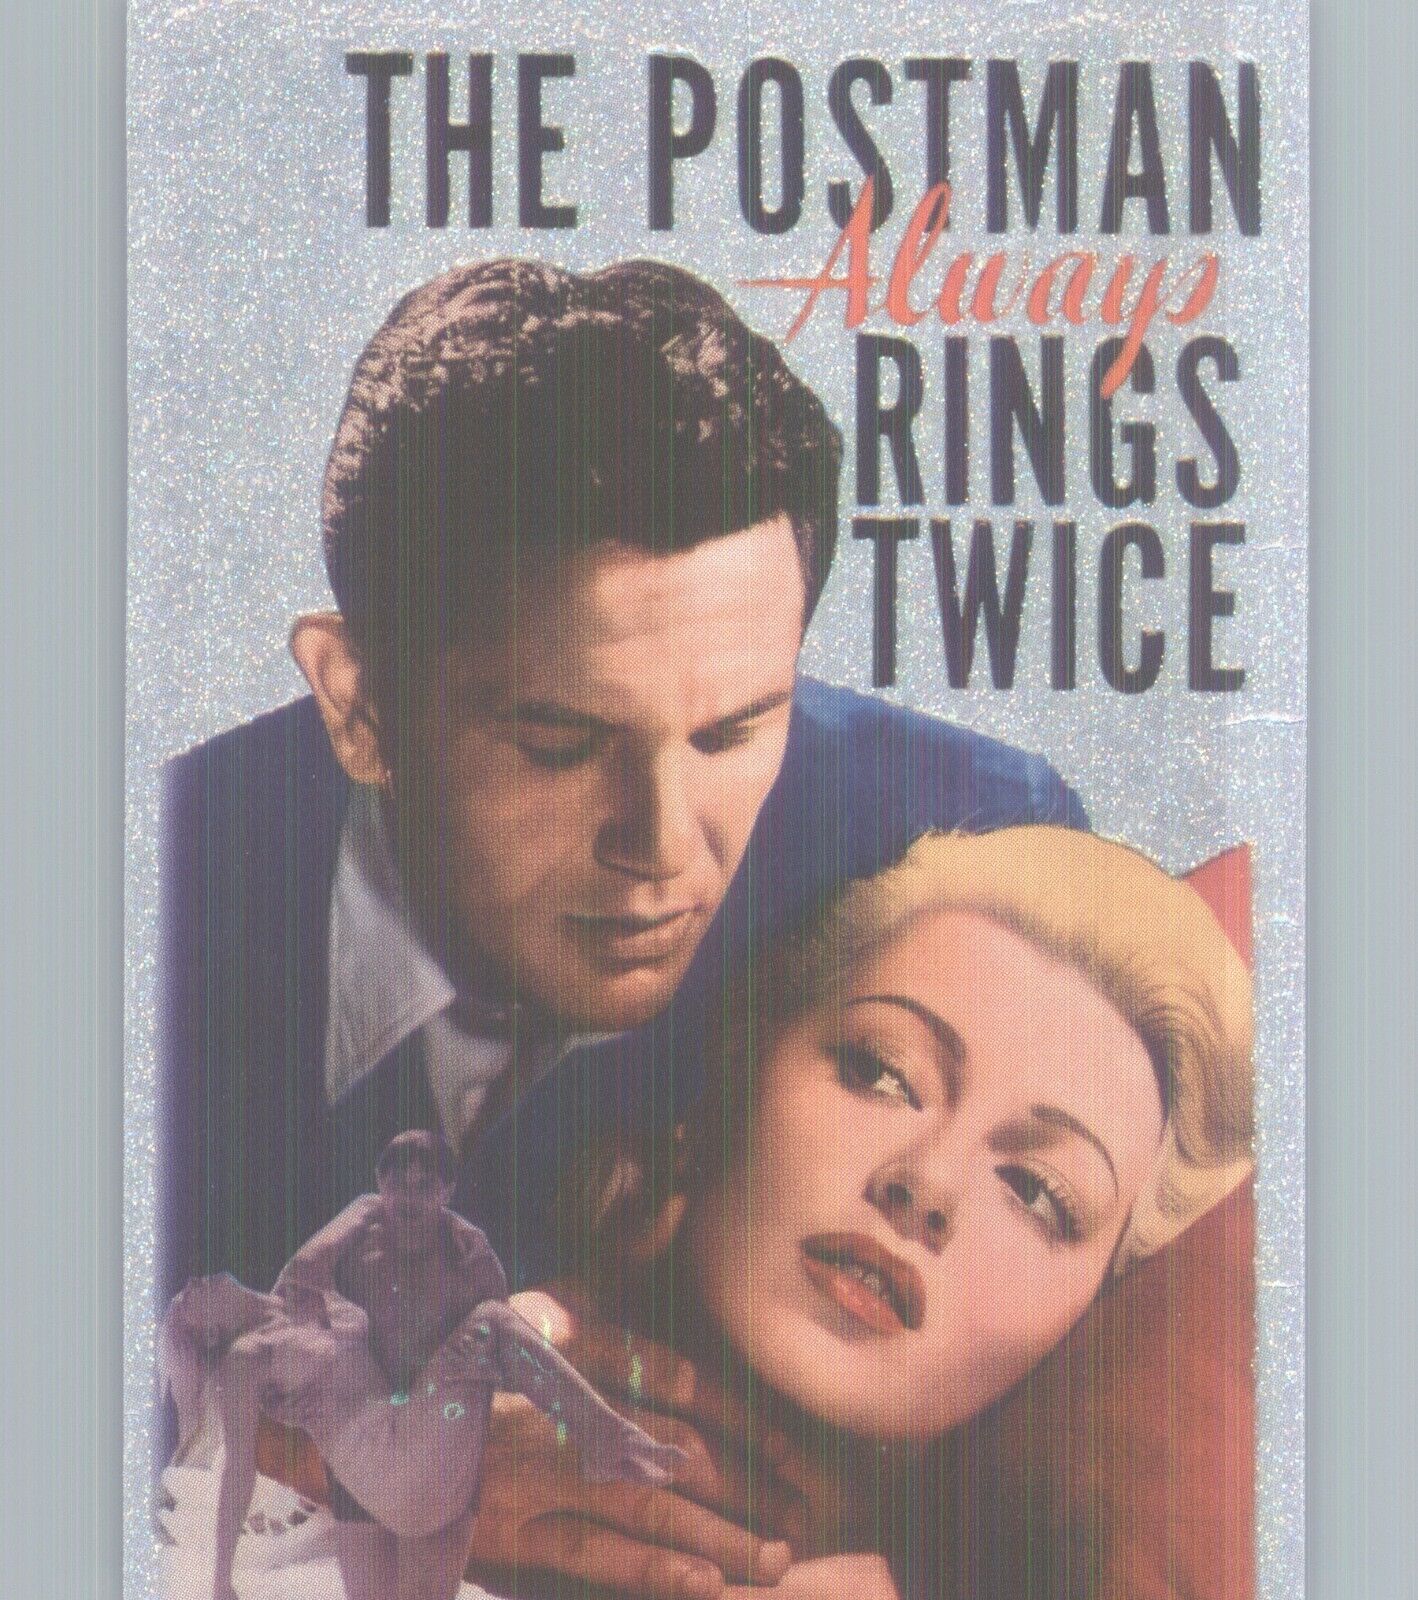 The Postman Always Rings Twice Lana Turner Classic Movie Poster Trading Card